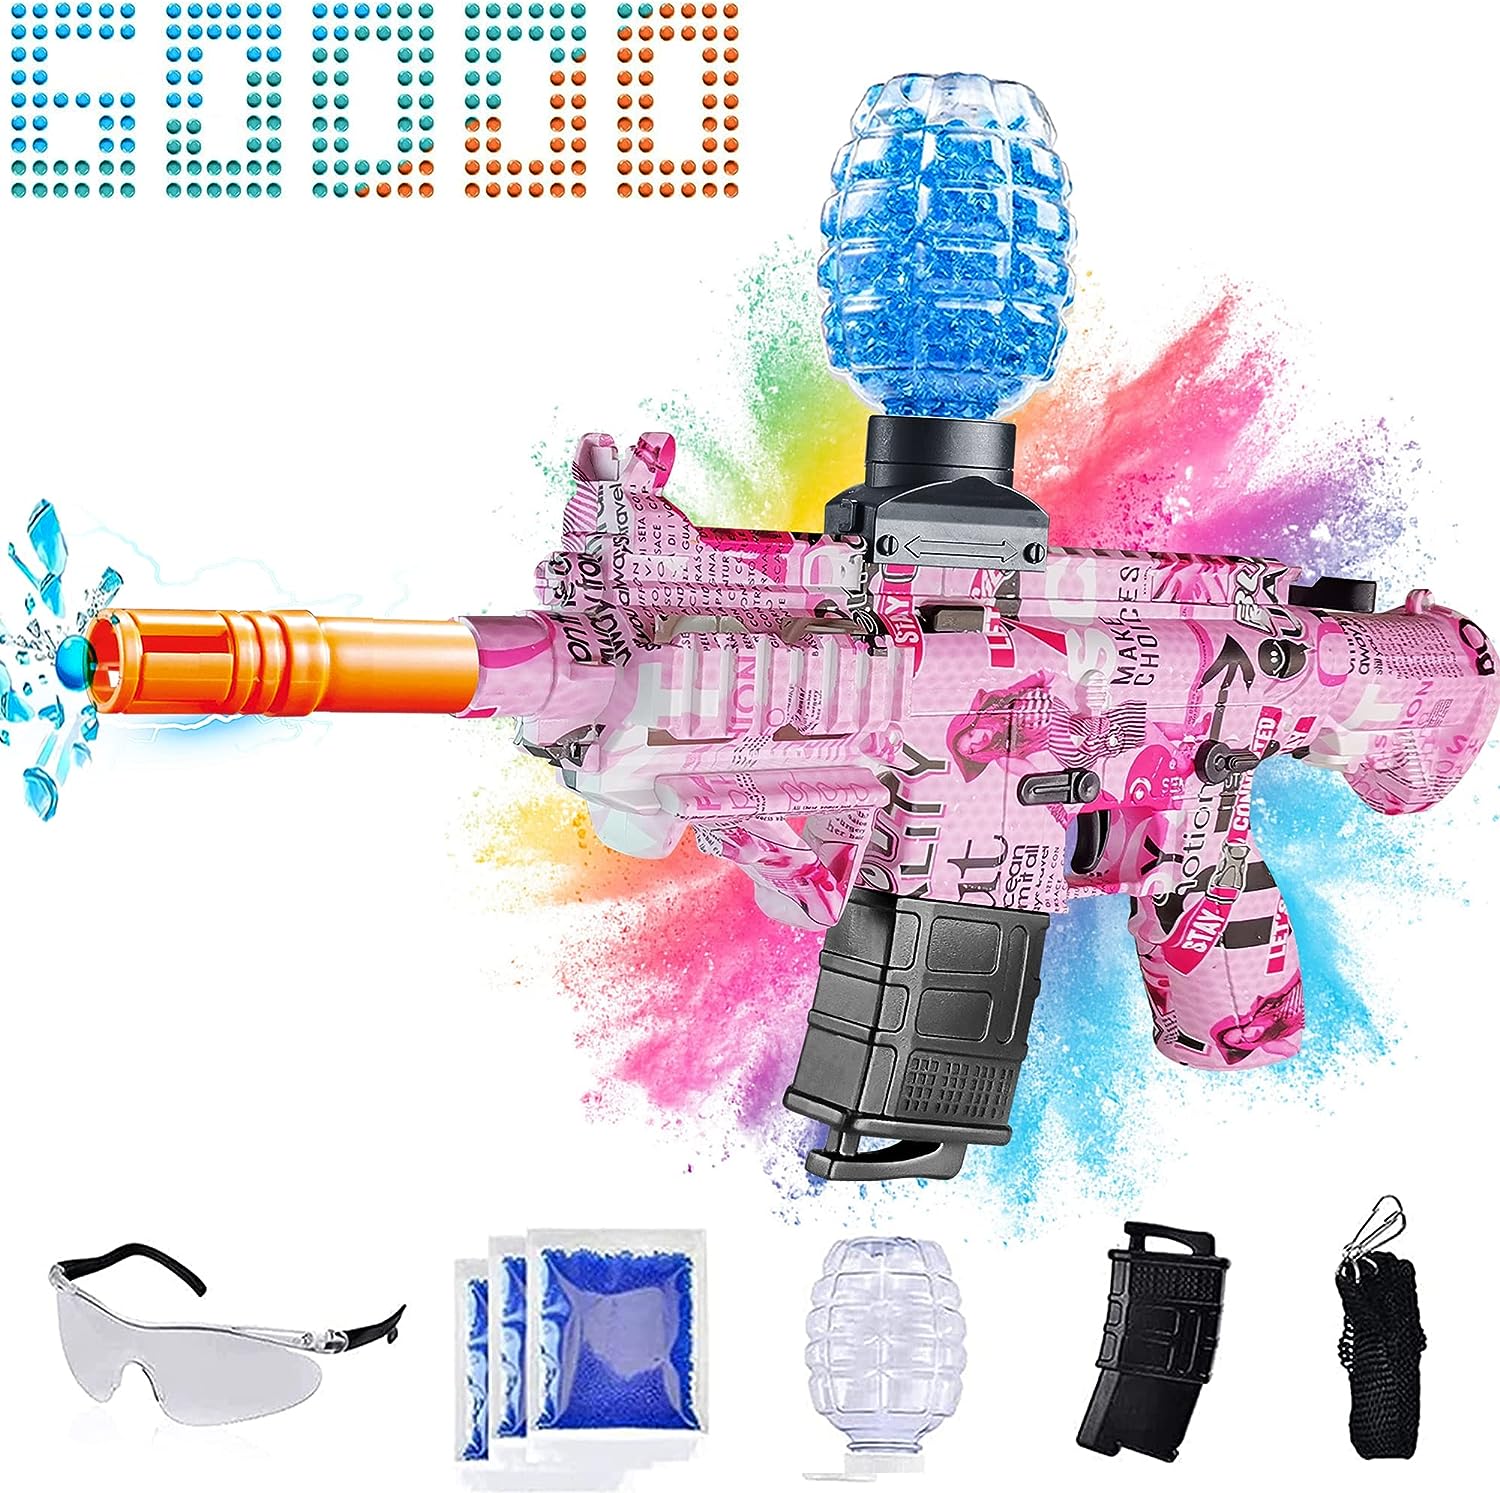 A pink Electric orbeez gun with googles and accessories.